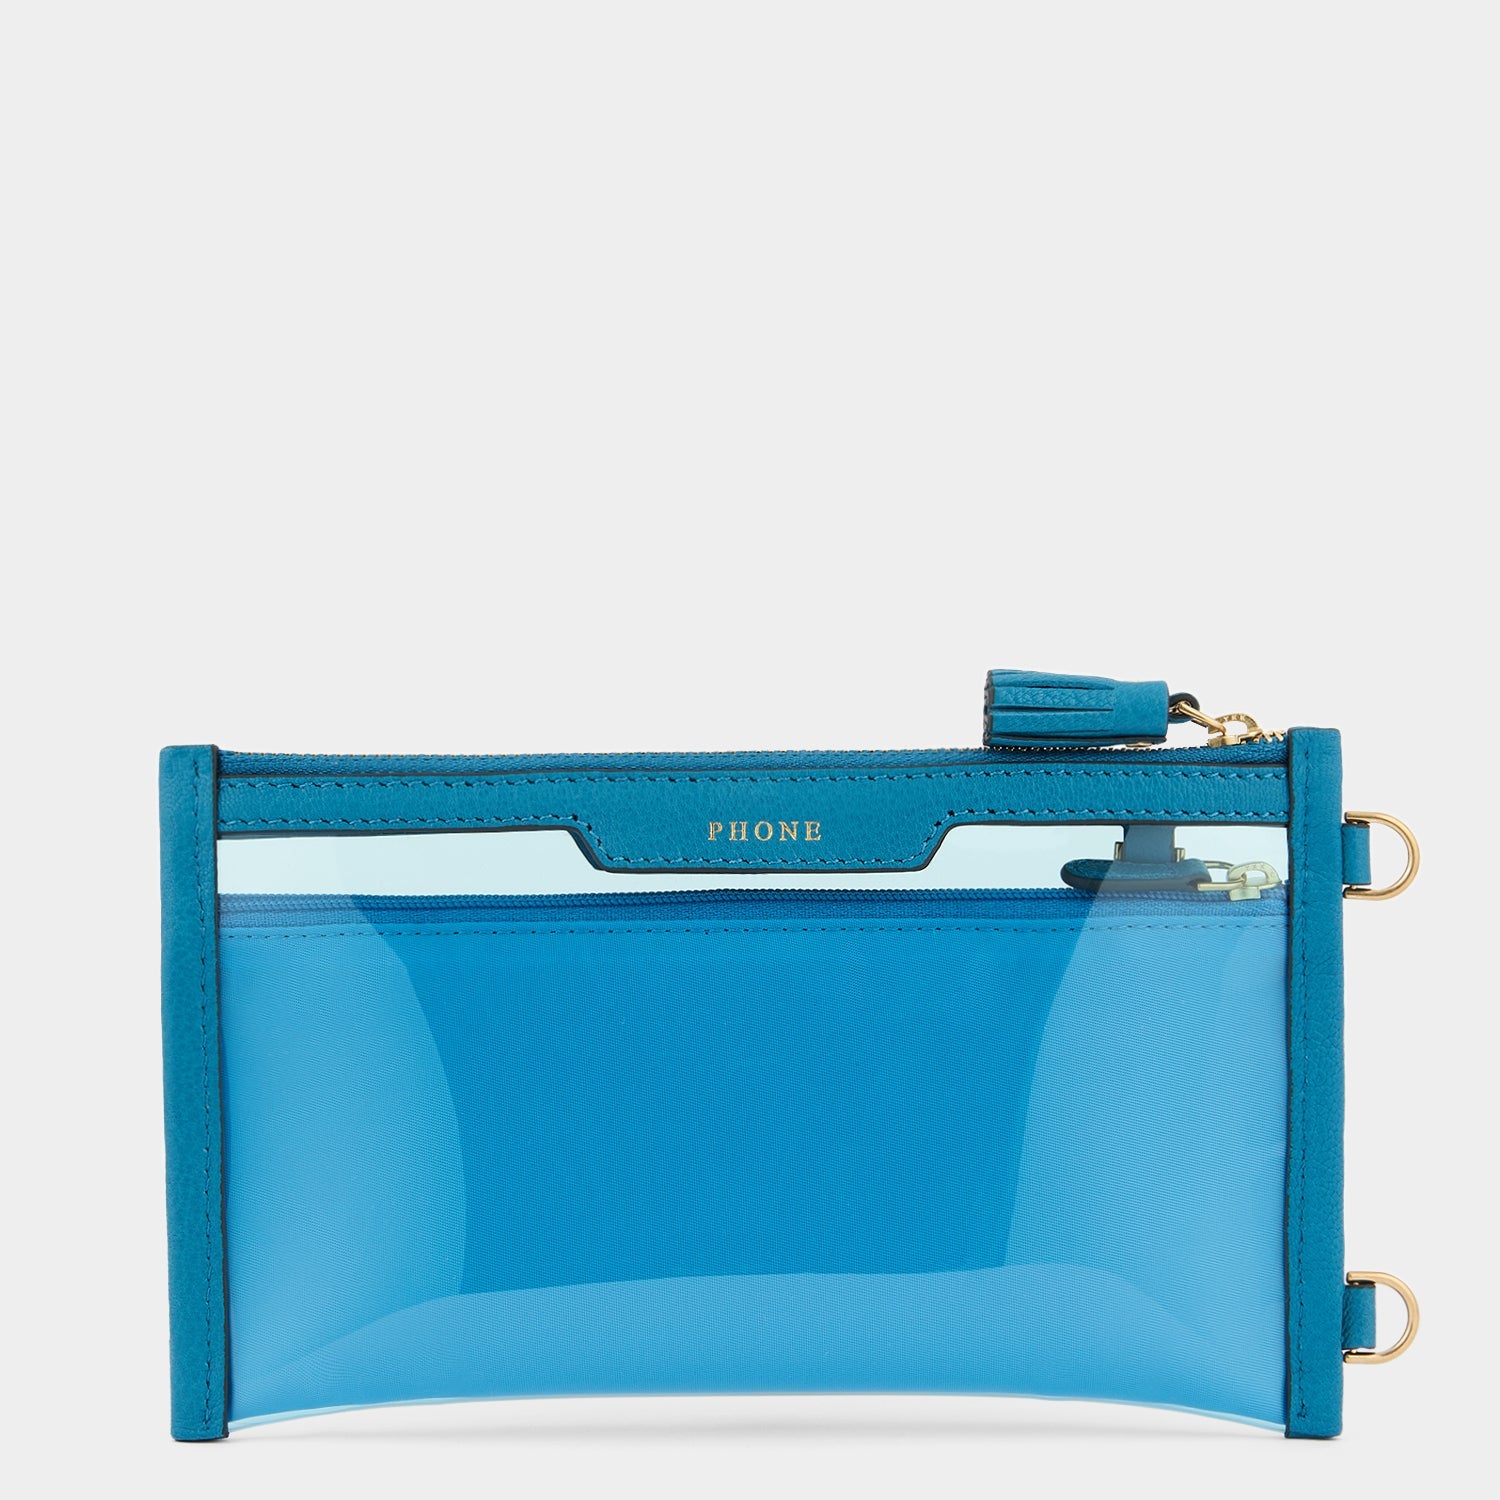 Everything Pouch -

                  
                    Capra Leather in Peacock -
                  

                  Anya Hindmarch EU
